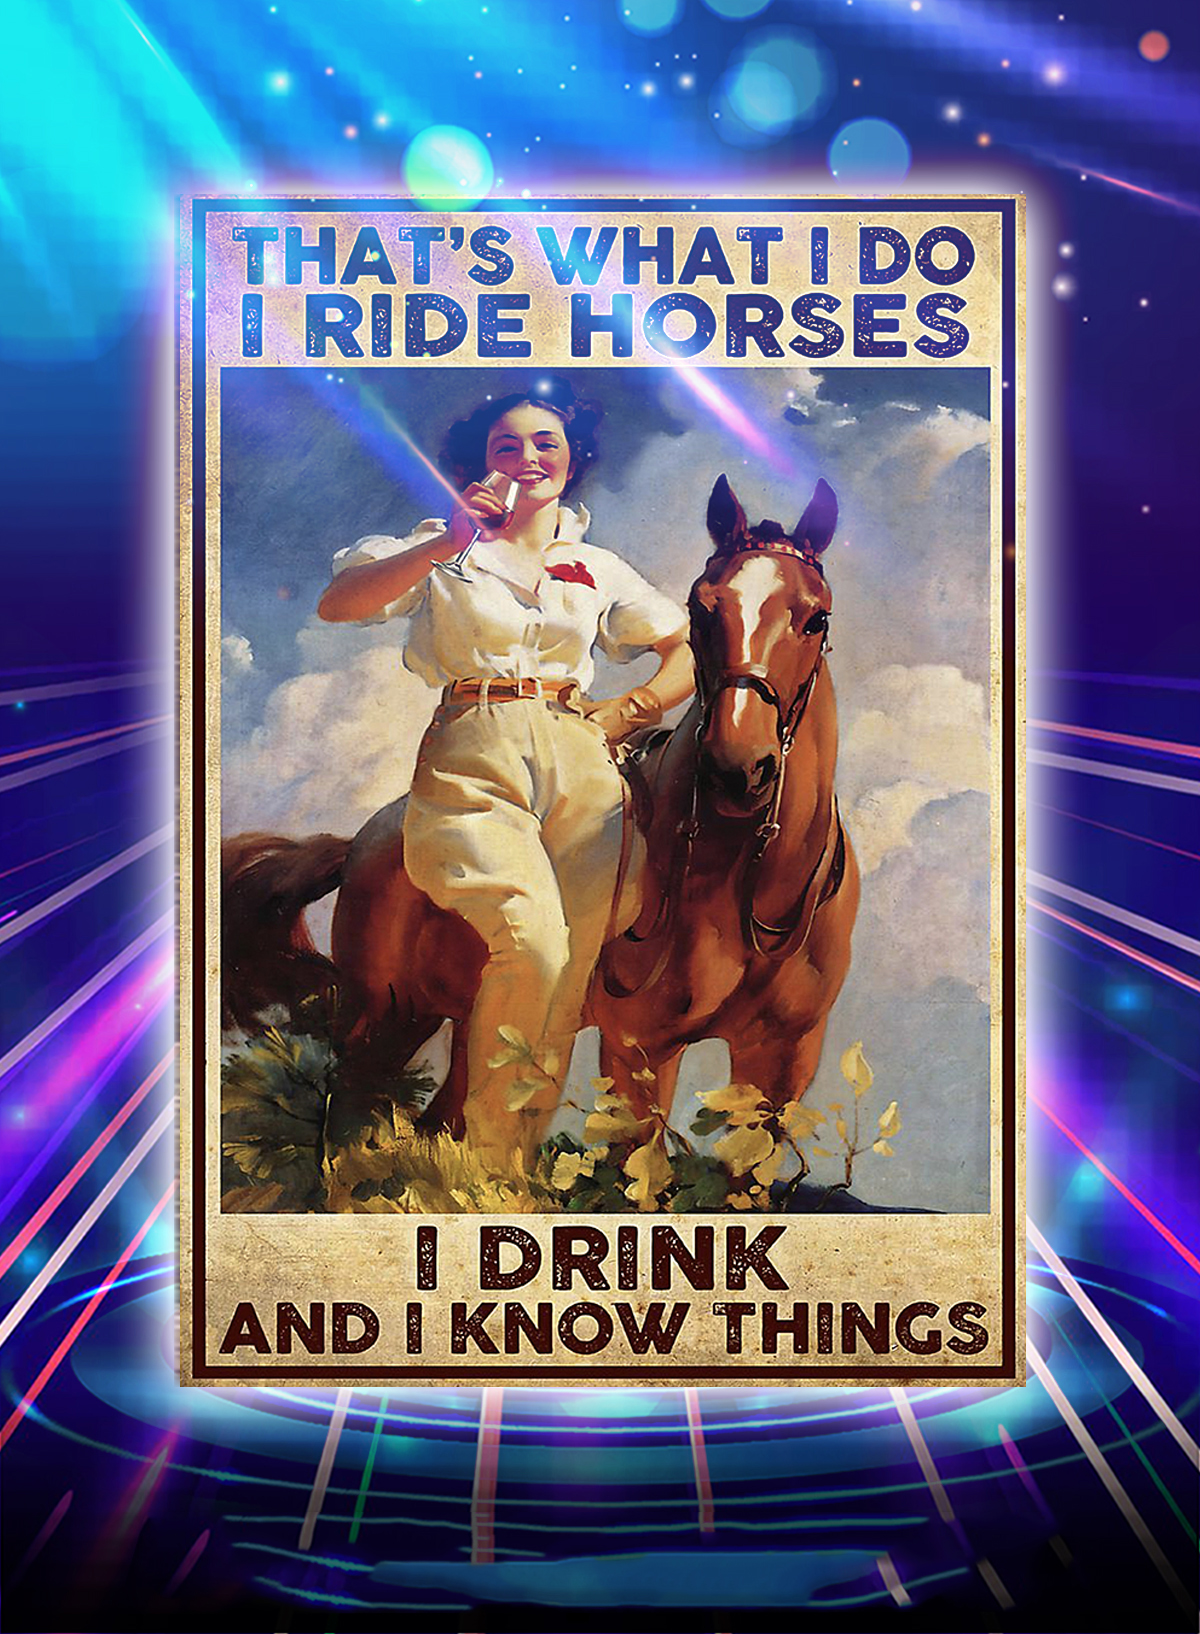 Girl that's what i do i ride horses i drink and i know things poster